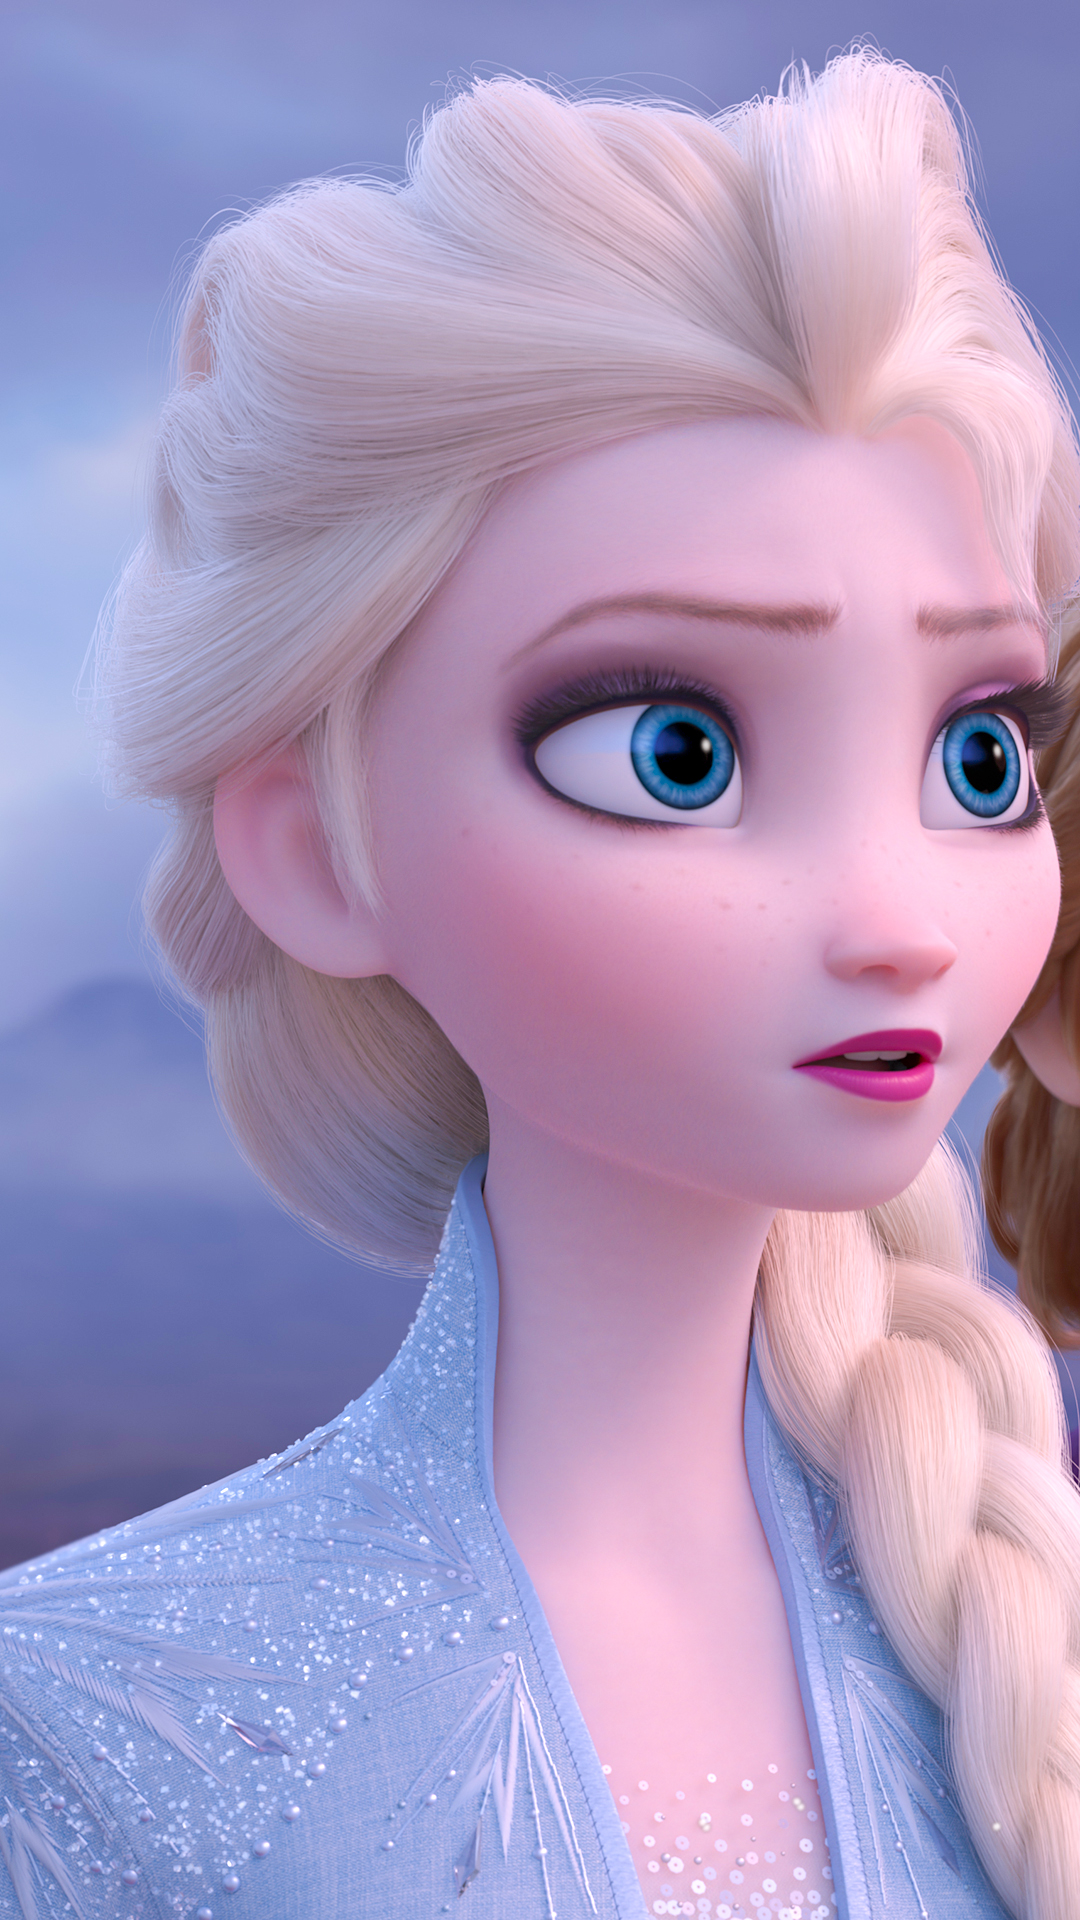 Frozen 2 Wallpapers For Iphone Hd Visual Arts Ideas